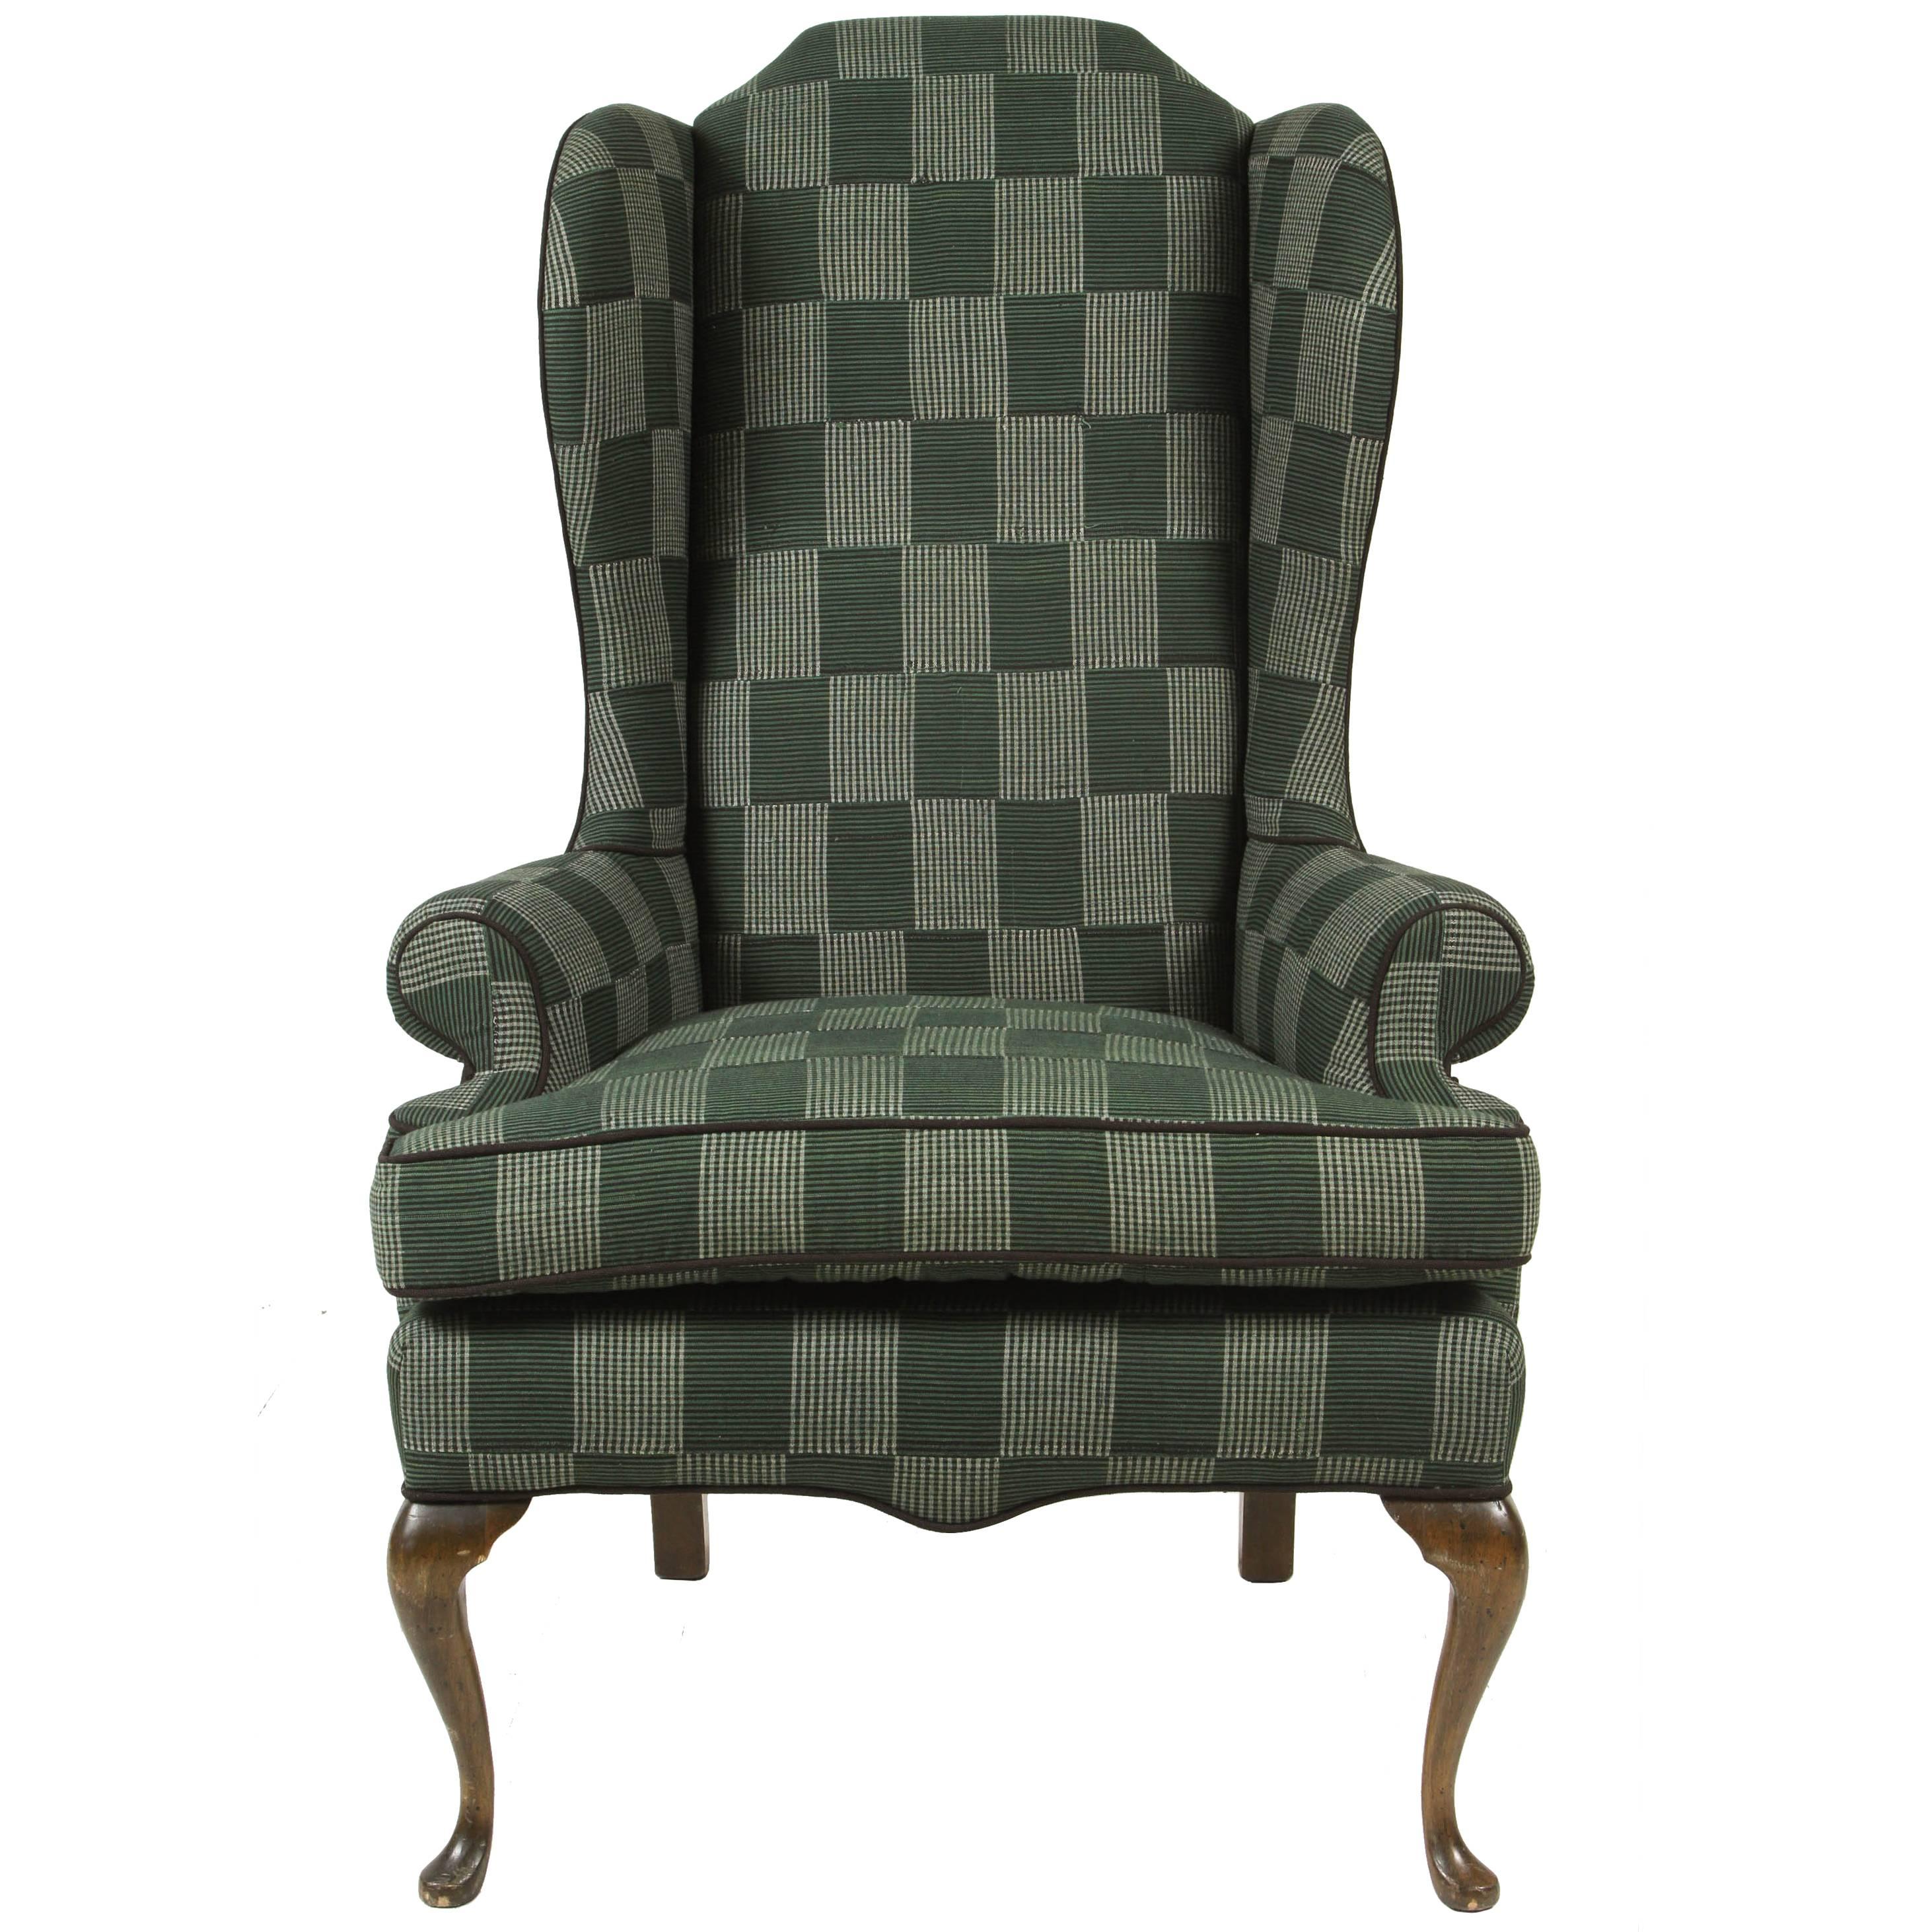 Classical Wing Chair Reupholstered in Green Plaid African Fabric